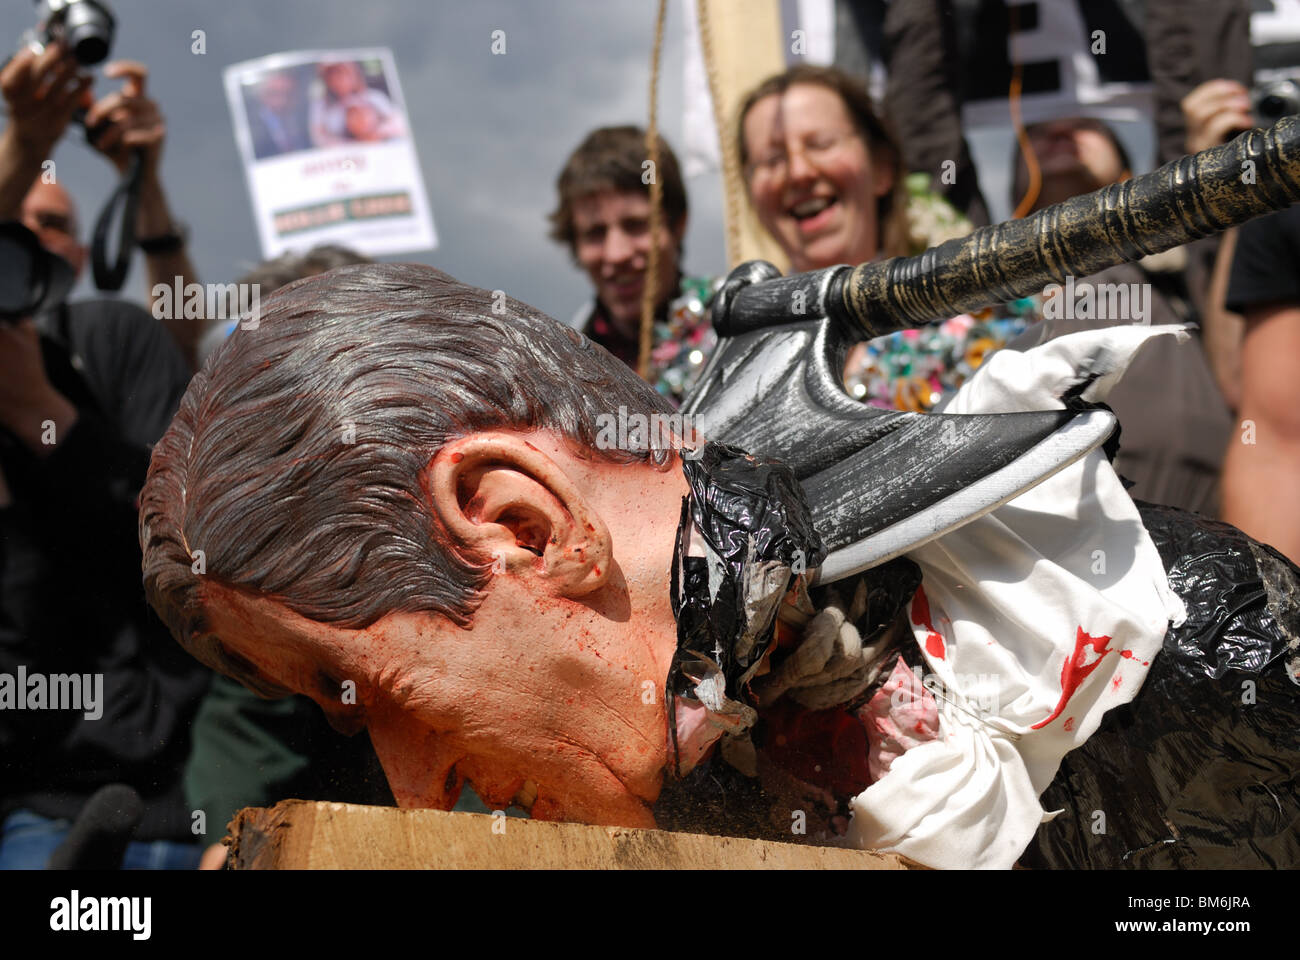 The effigy of Gordon Brown is beheaded in Parliament Square on May Day. Stock Photo